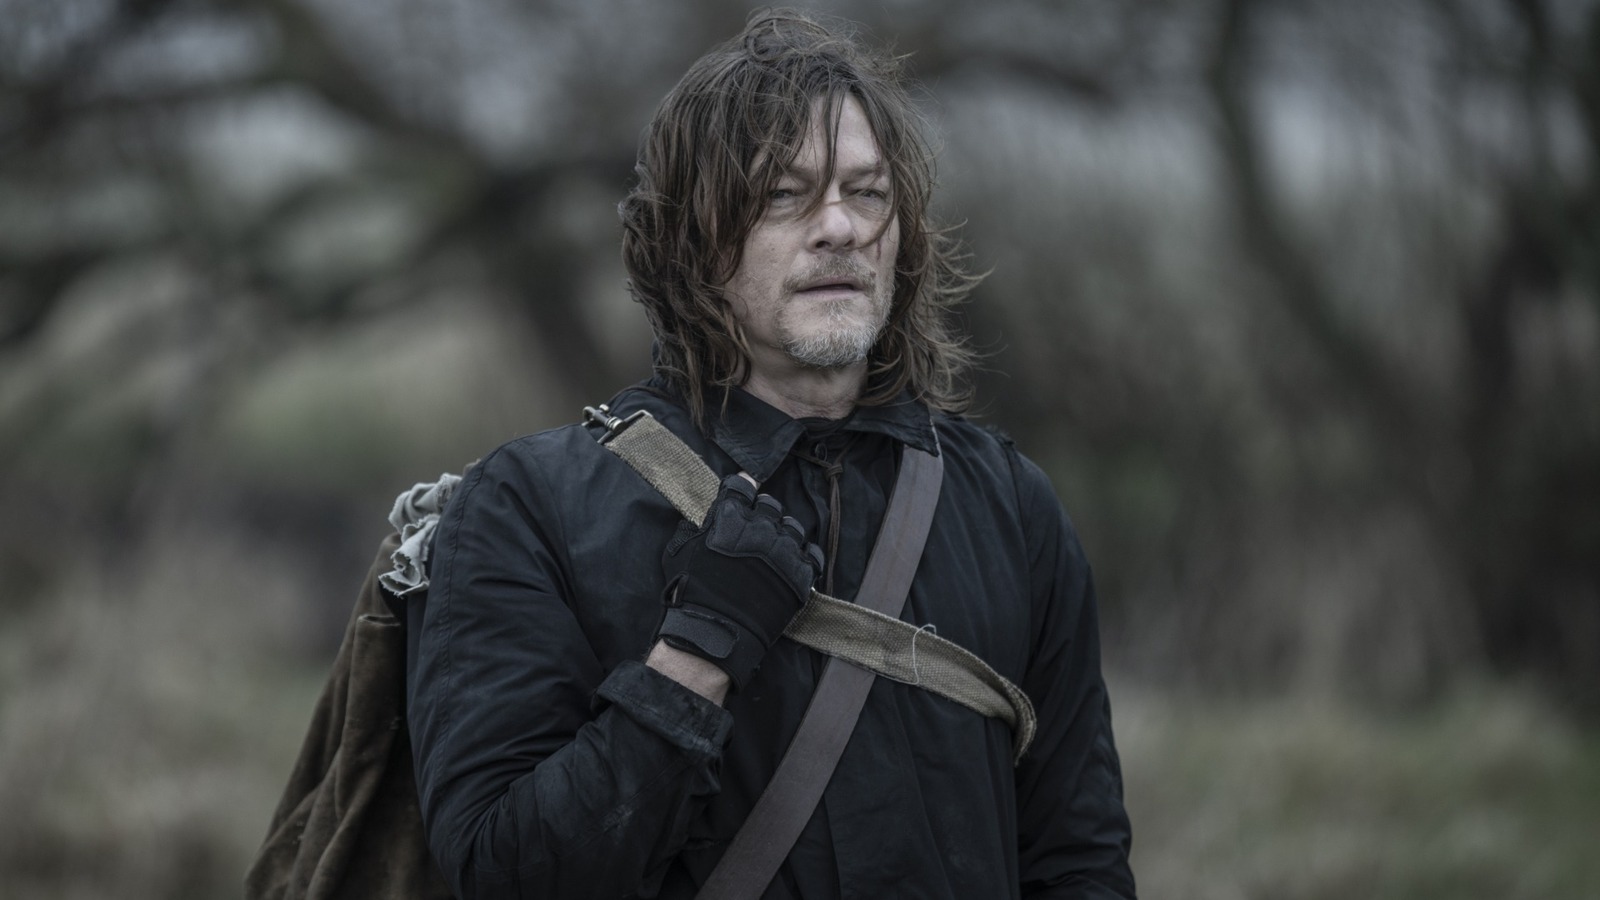 The Walking Dead: Daryl Dixon' Review: A Fun, French-Flavored Spinoff